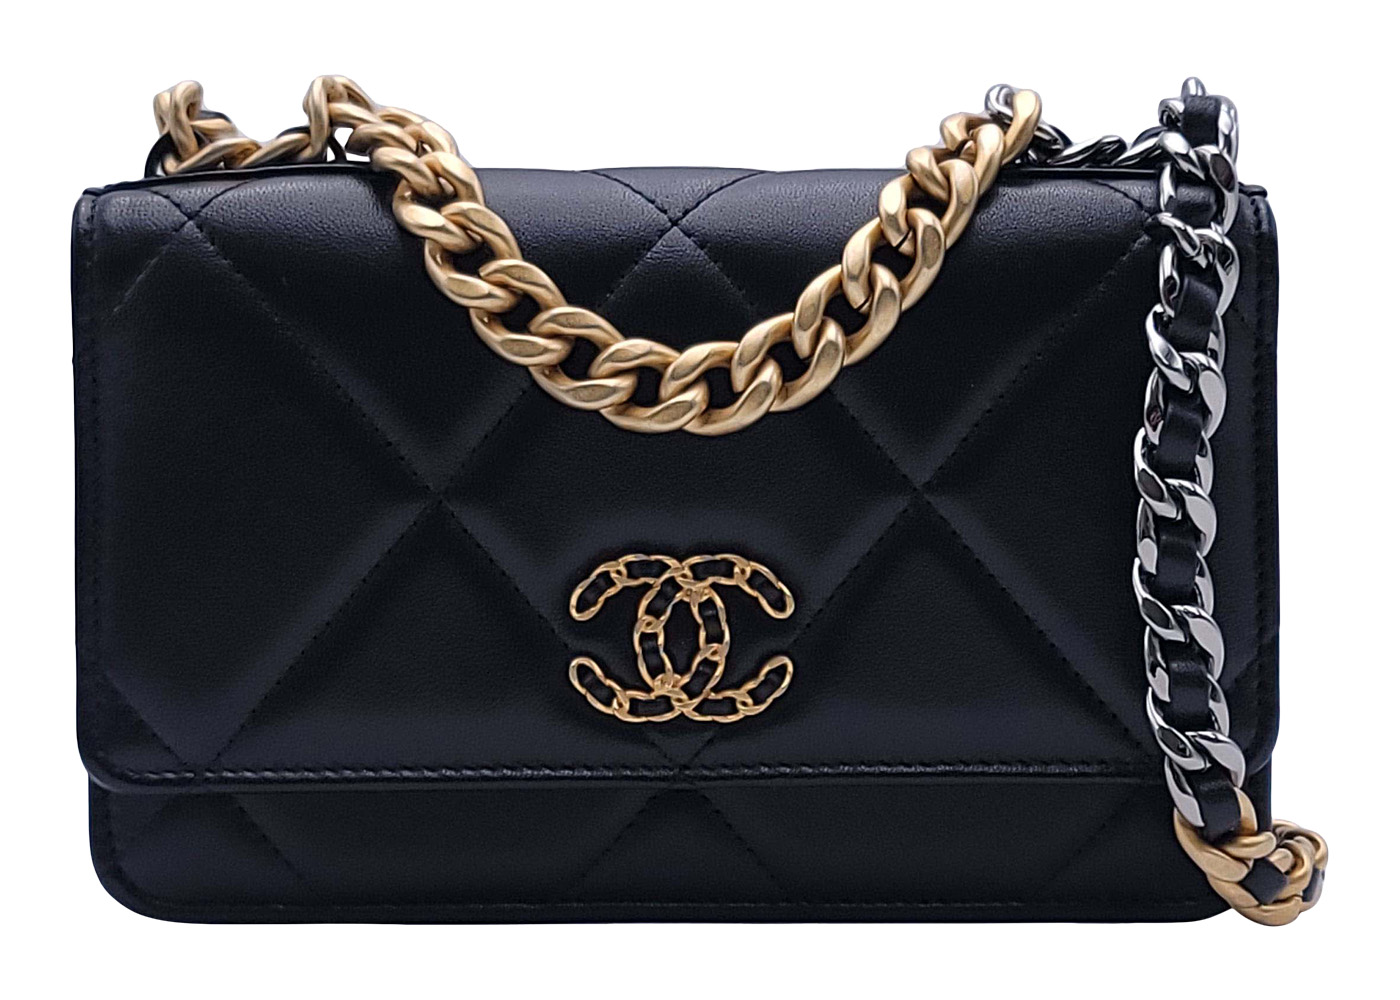 Chanel handbags: The complete buyer's guide